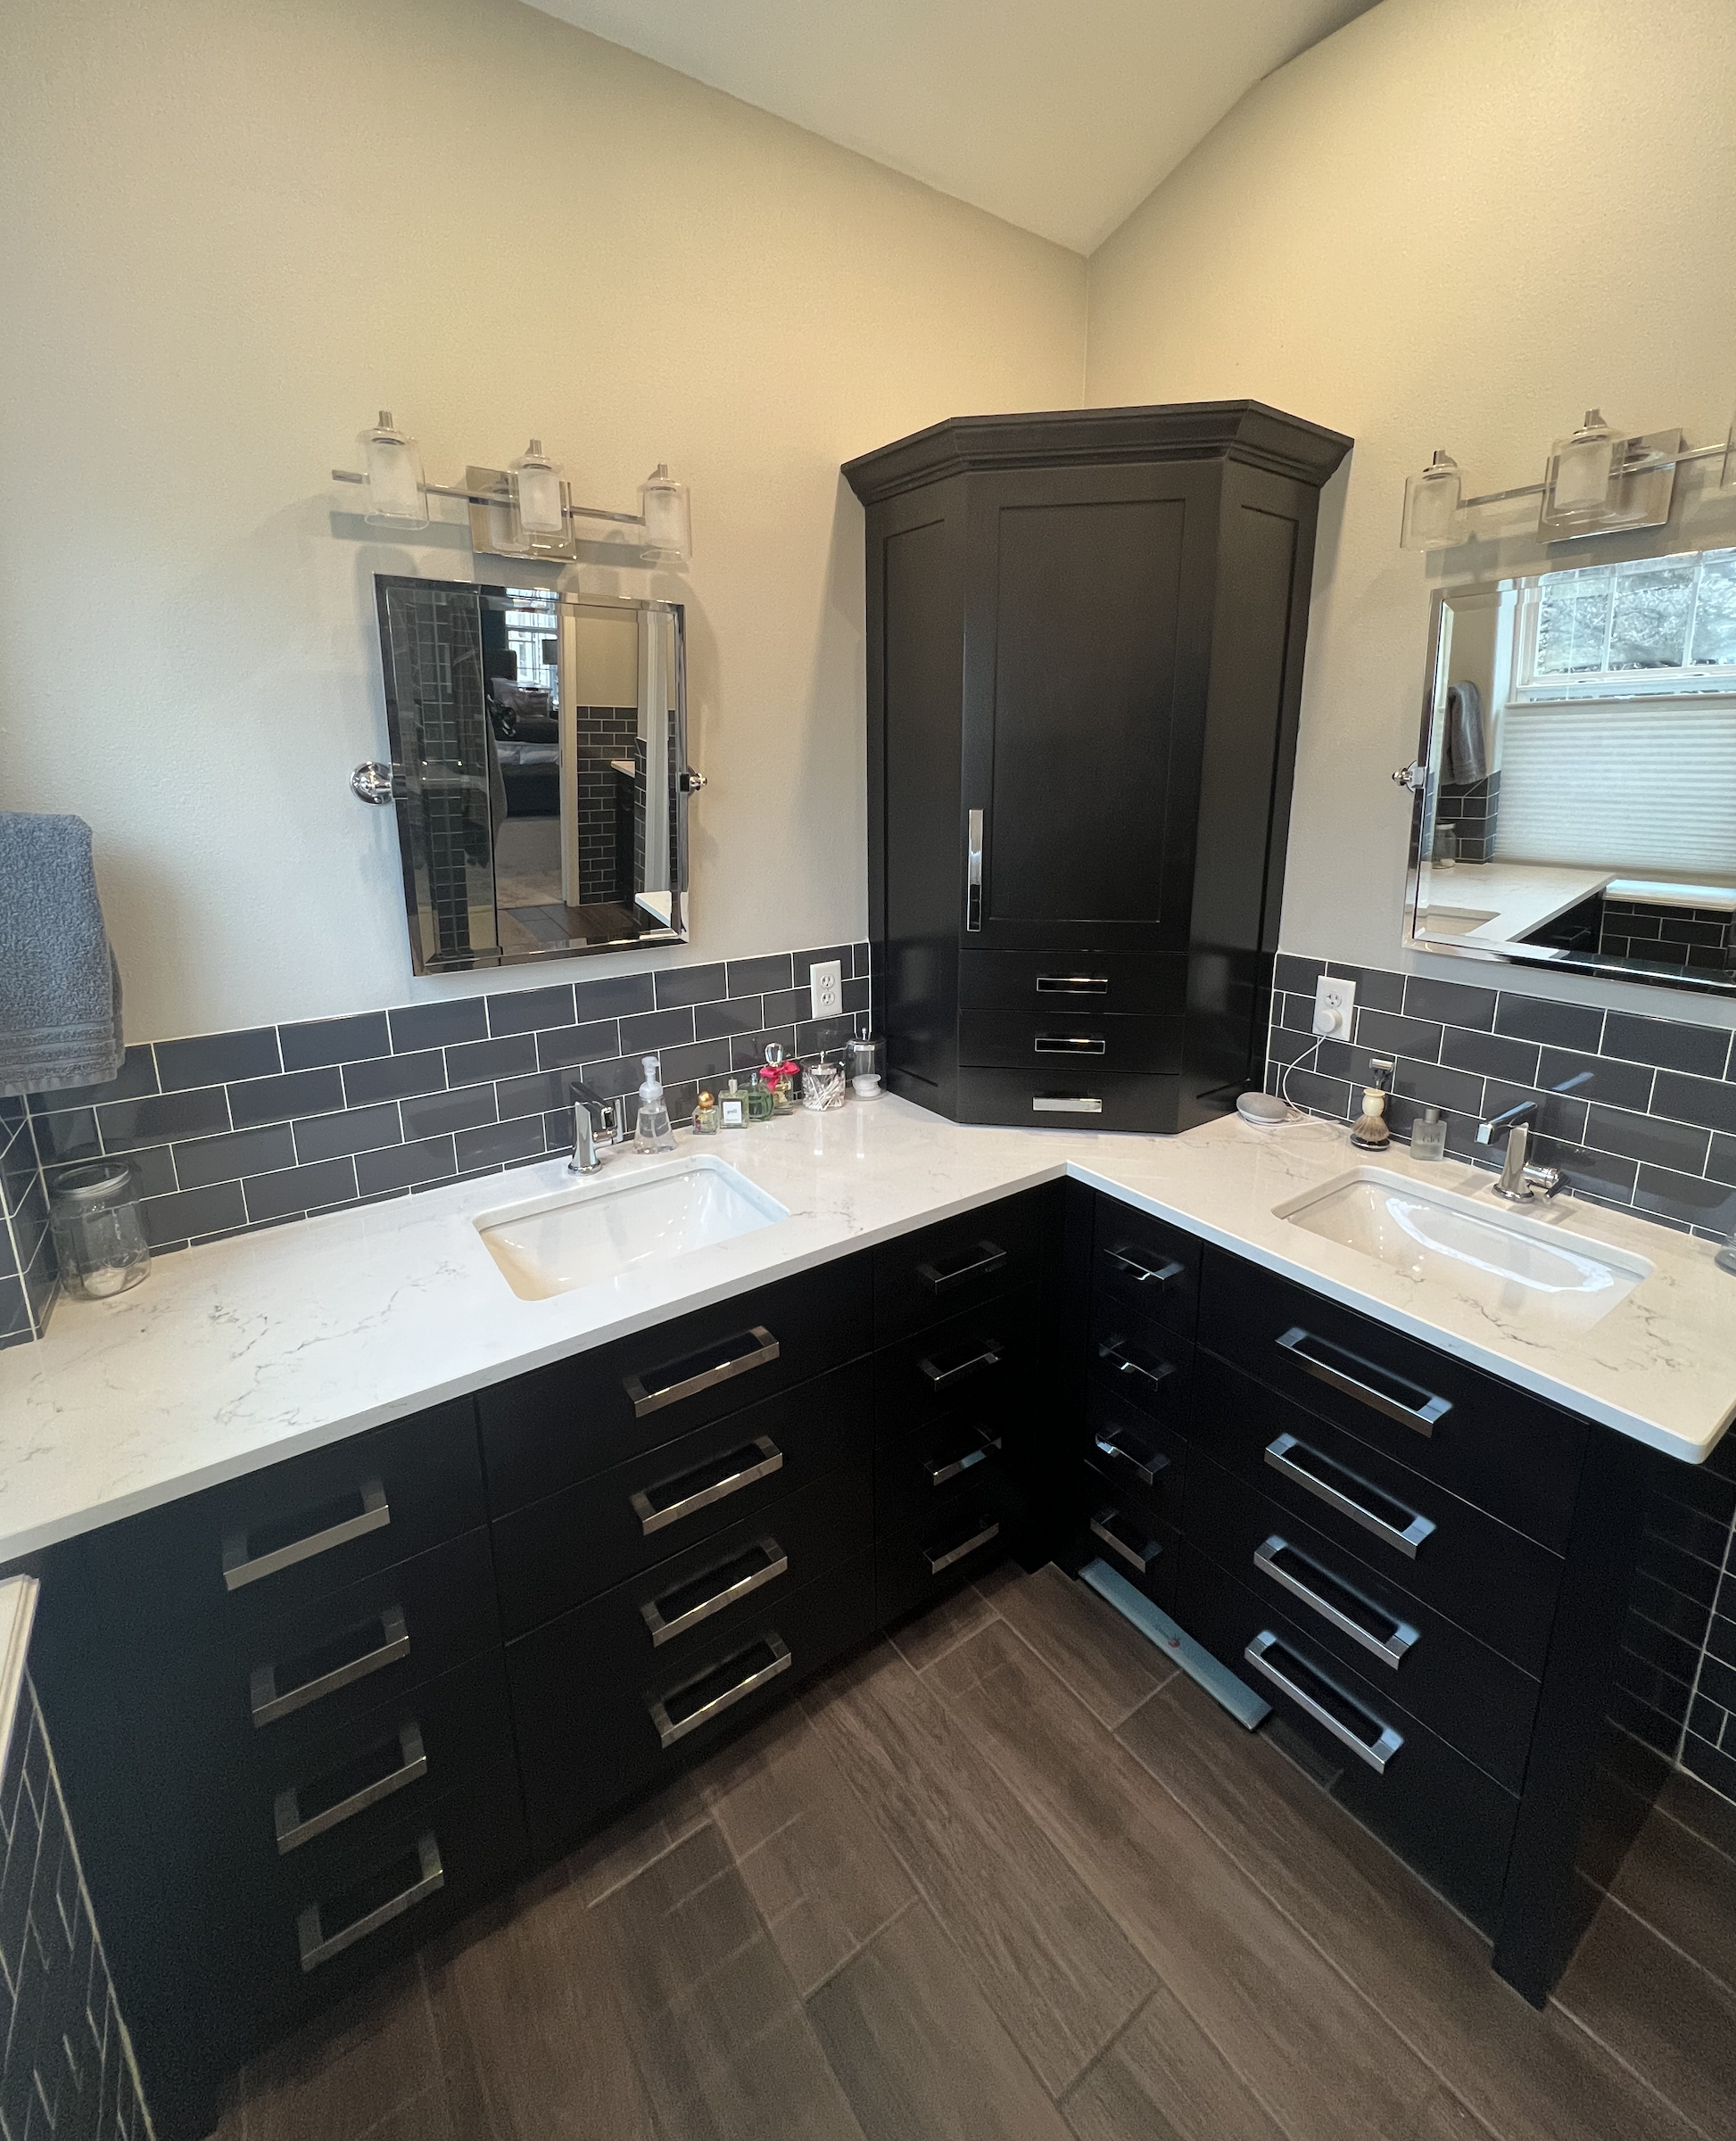 residential sinks & cabinets photo